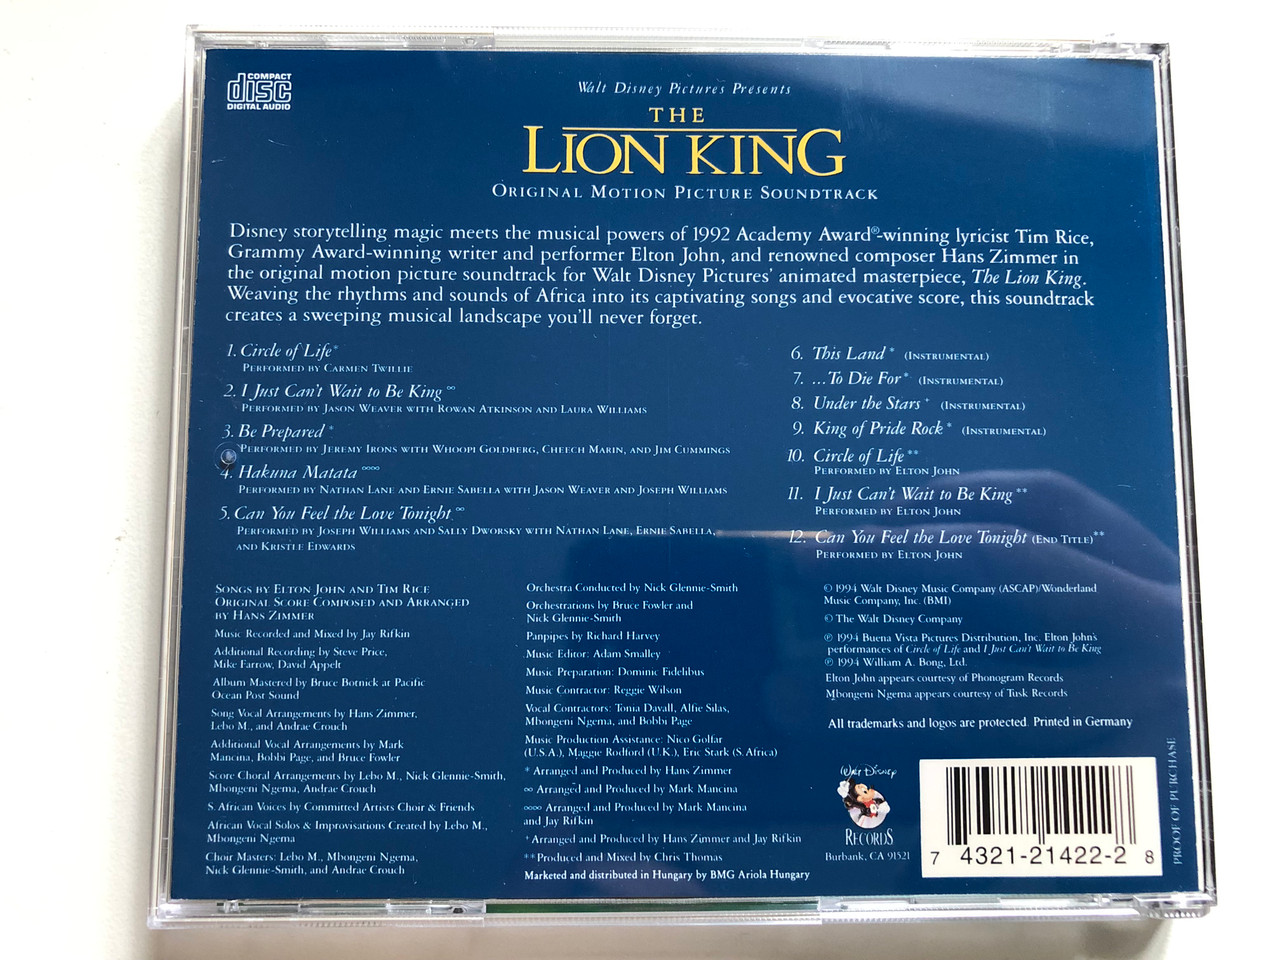 https://cdn10.bigcommerce.com/s-62bdpkt7pb/products/0/images/313997/The_Lion_King_Original_Motion_Picture_Soundtrack_-_Original_Songs_Music_By_Elton_John_Lyrics_by_Tim_Rice_Score_Composed_by_Hans_Zimmer_Walt_Disney_Records_Audio_CD_1994_74321214222___55416.1701245327.1280.1280.JPG?c=2